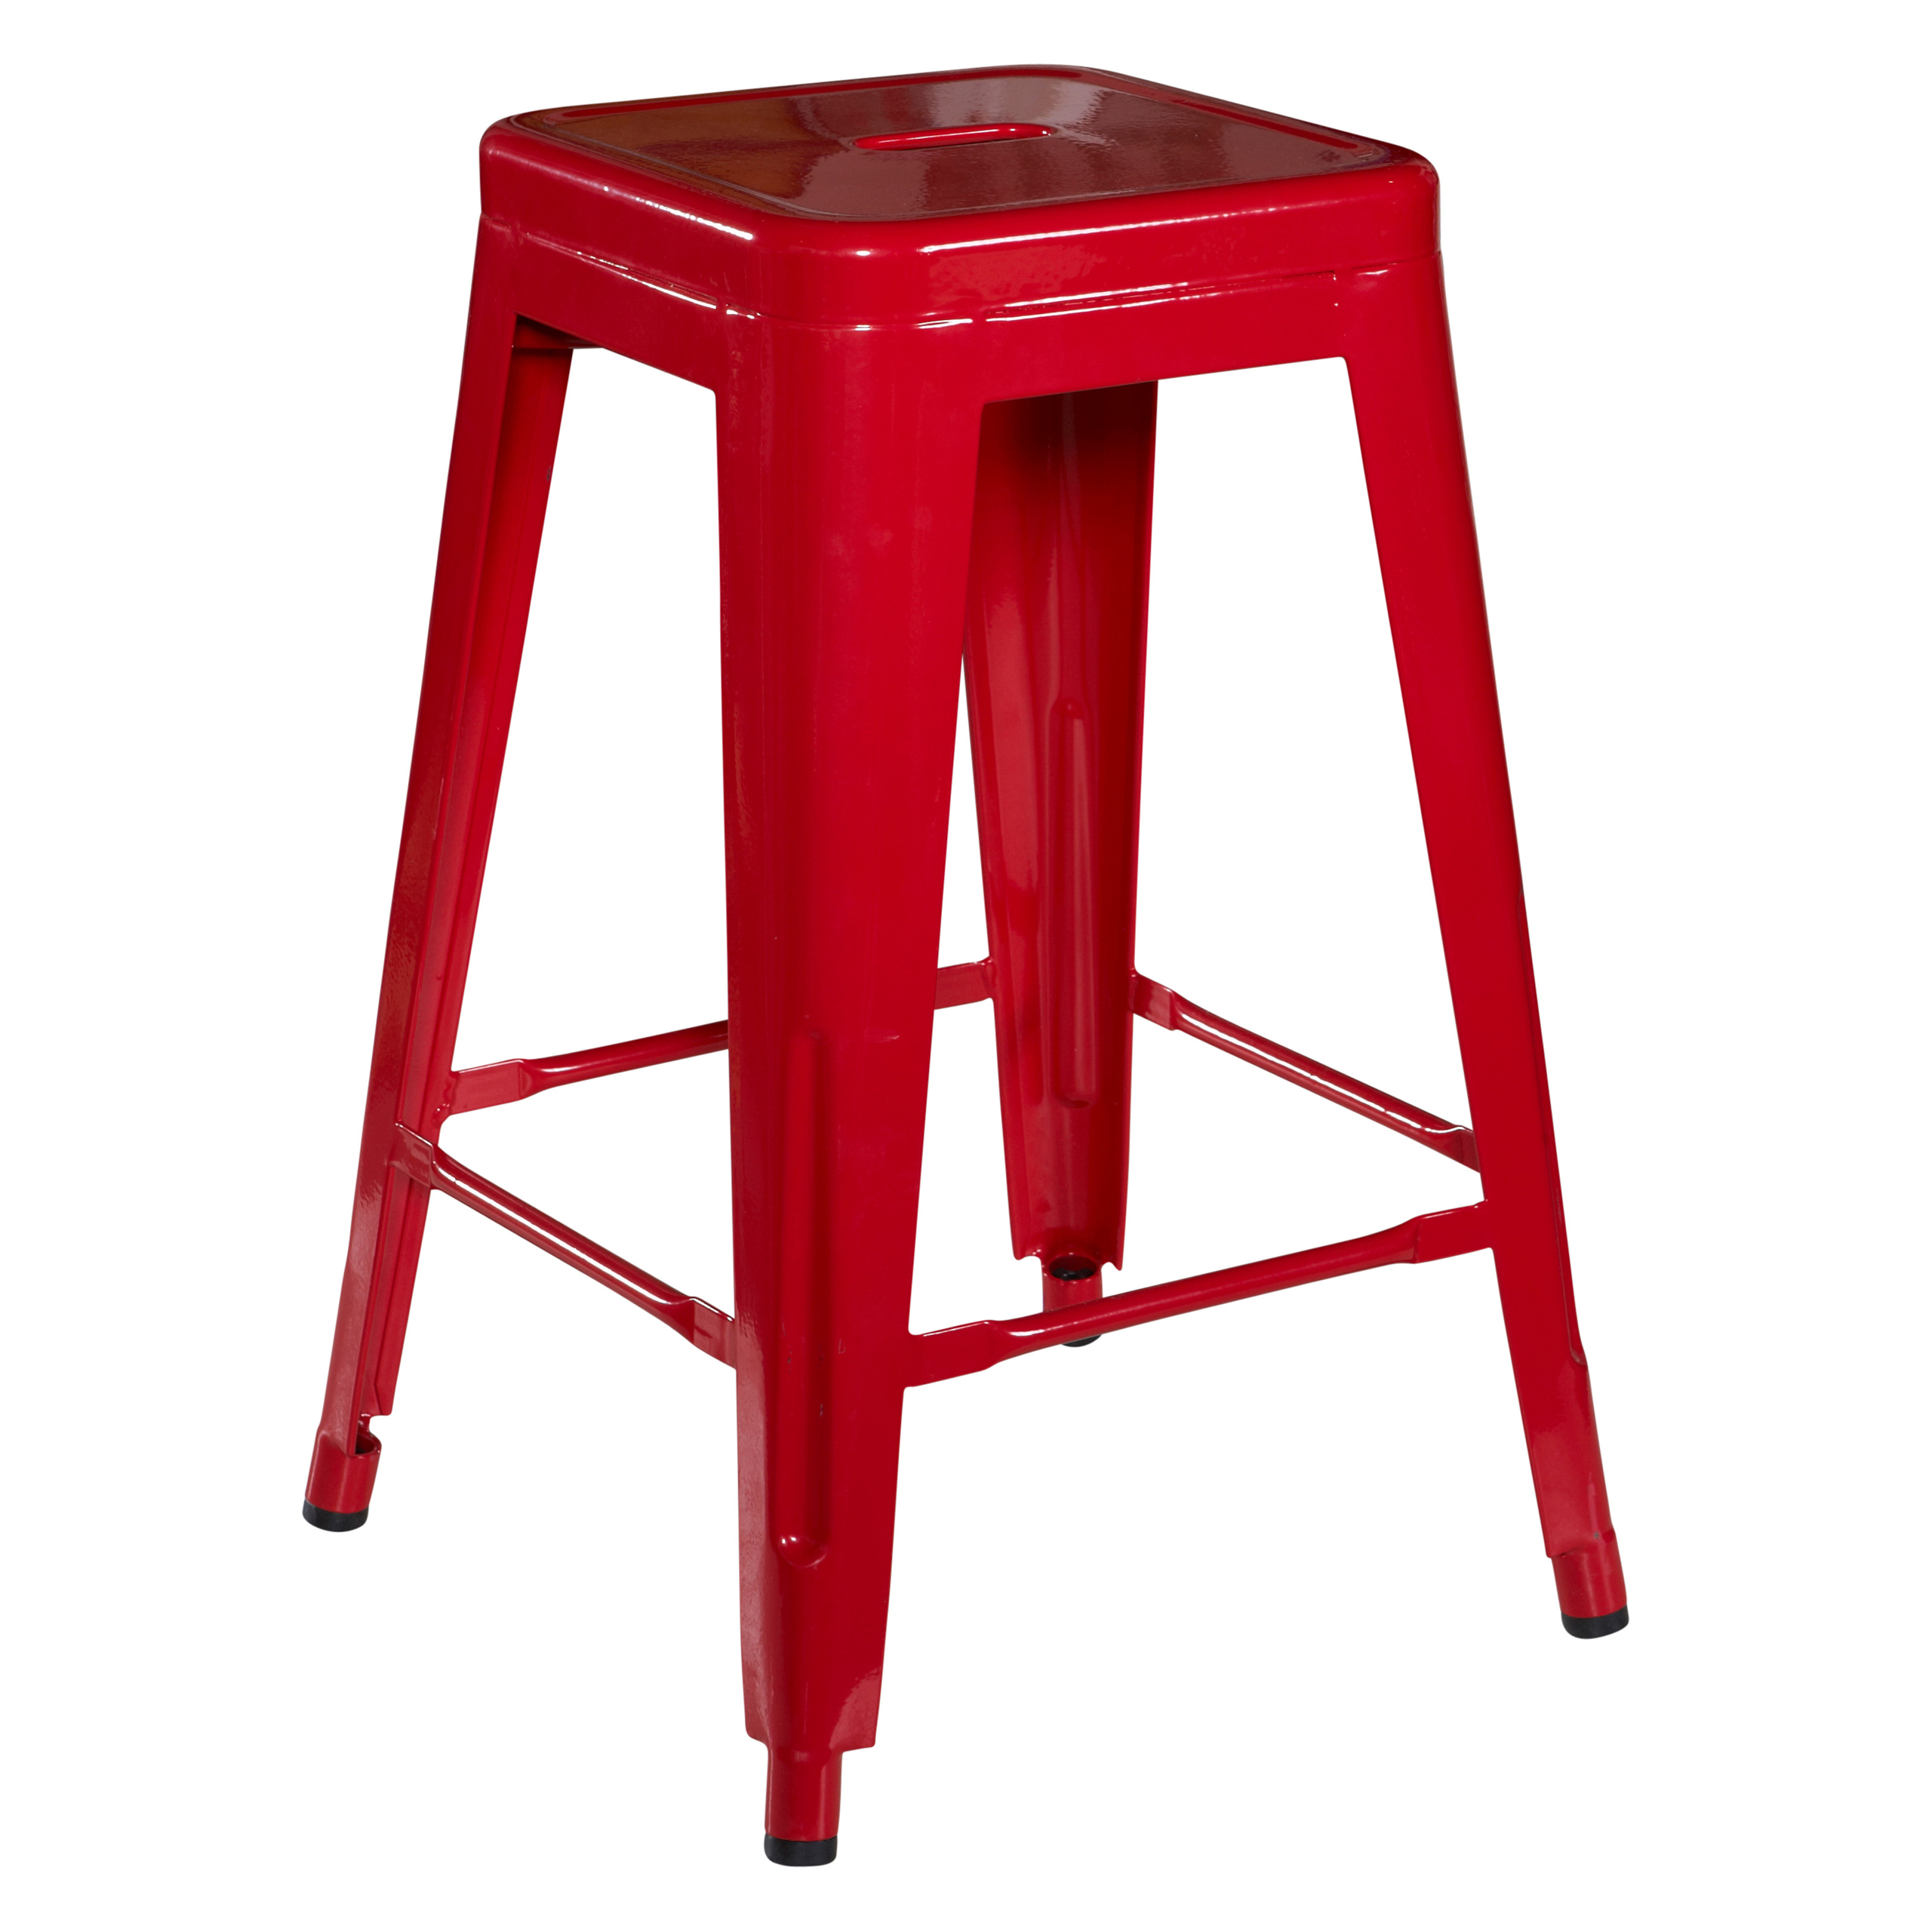 Red backless bar stools 1